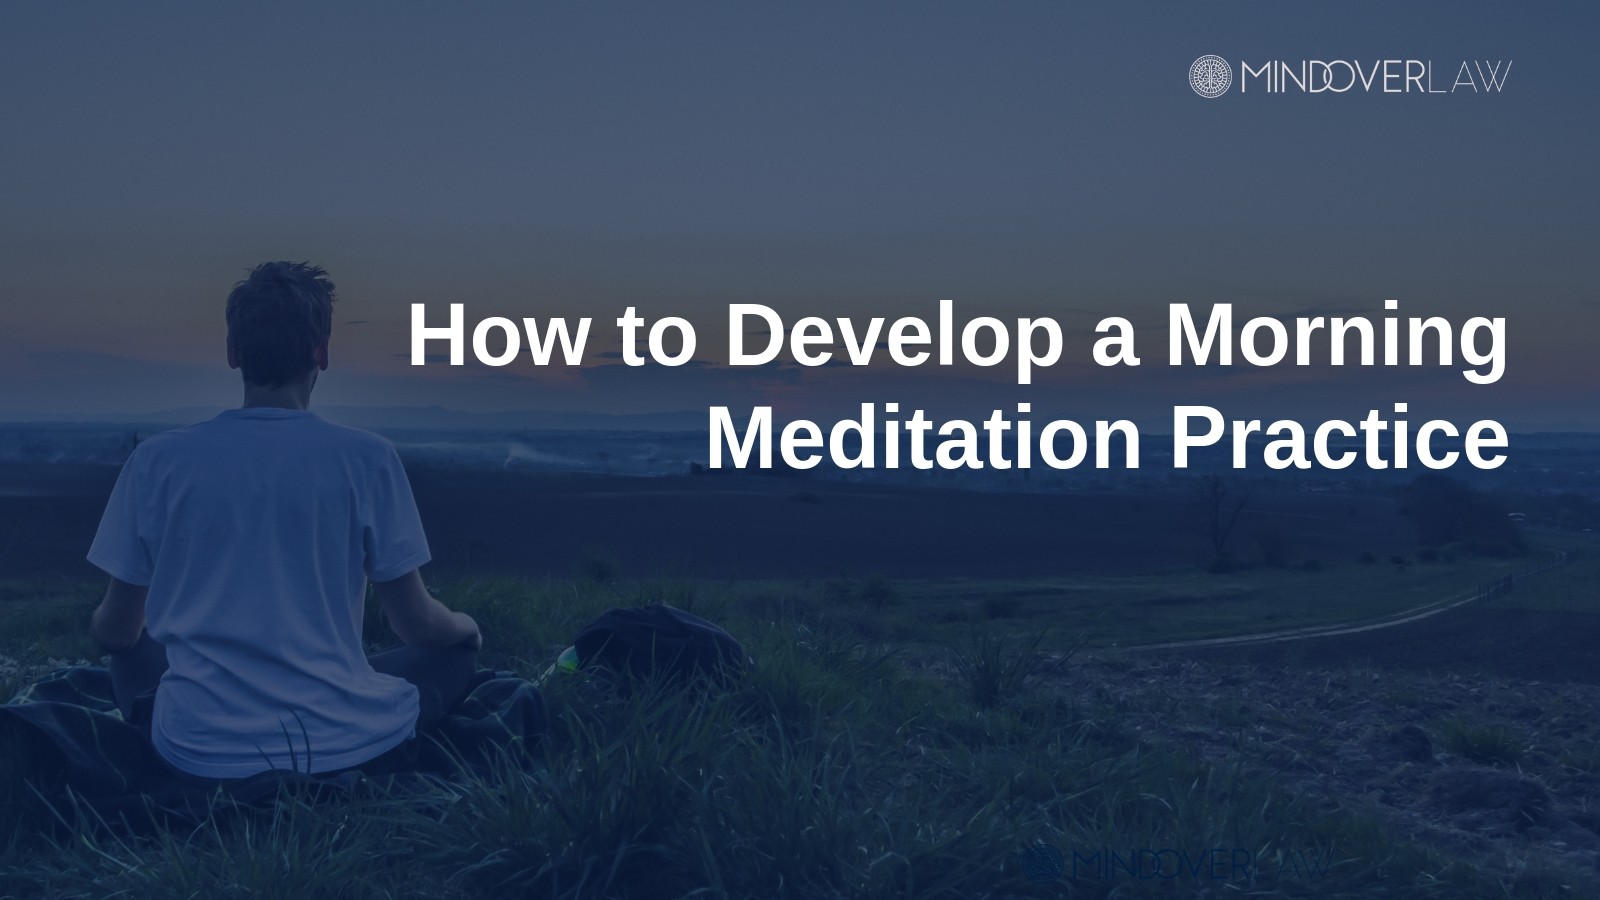 How to Develop a Morning Meditation Practice - mind over law